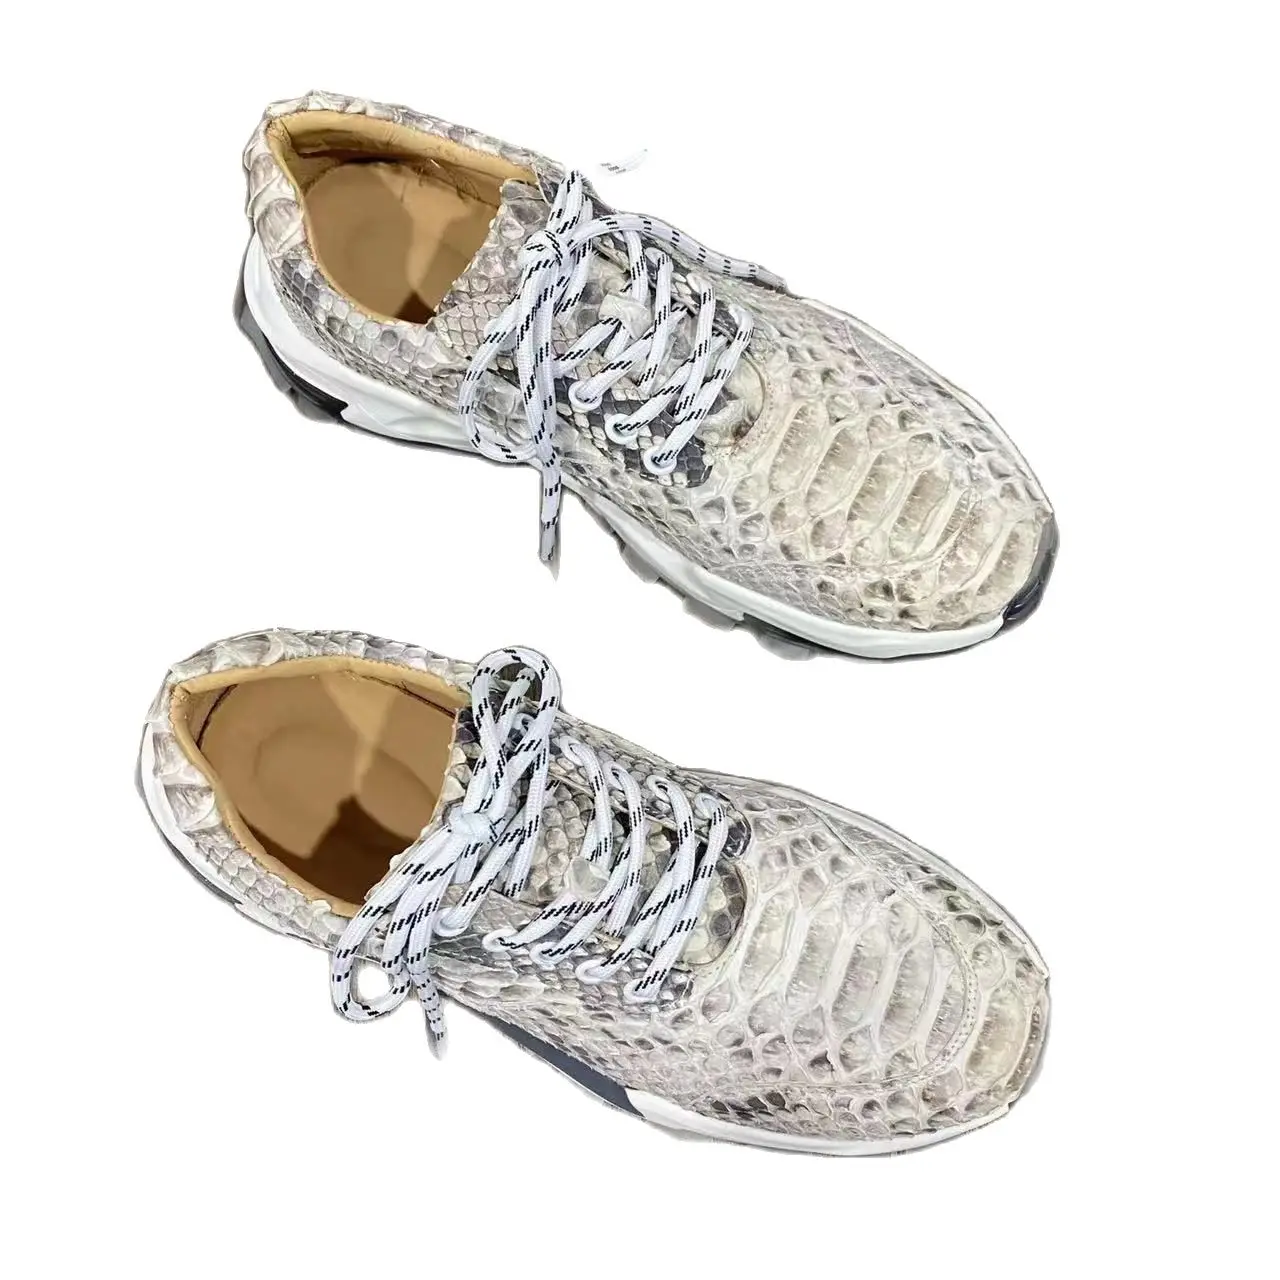 new arrival Fashion snake skin causal shoes men,male Genuine leather SNE... - $260.81